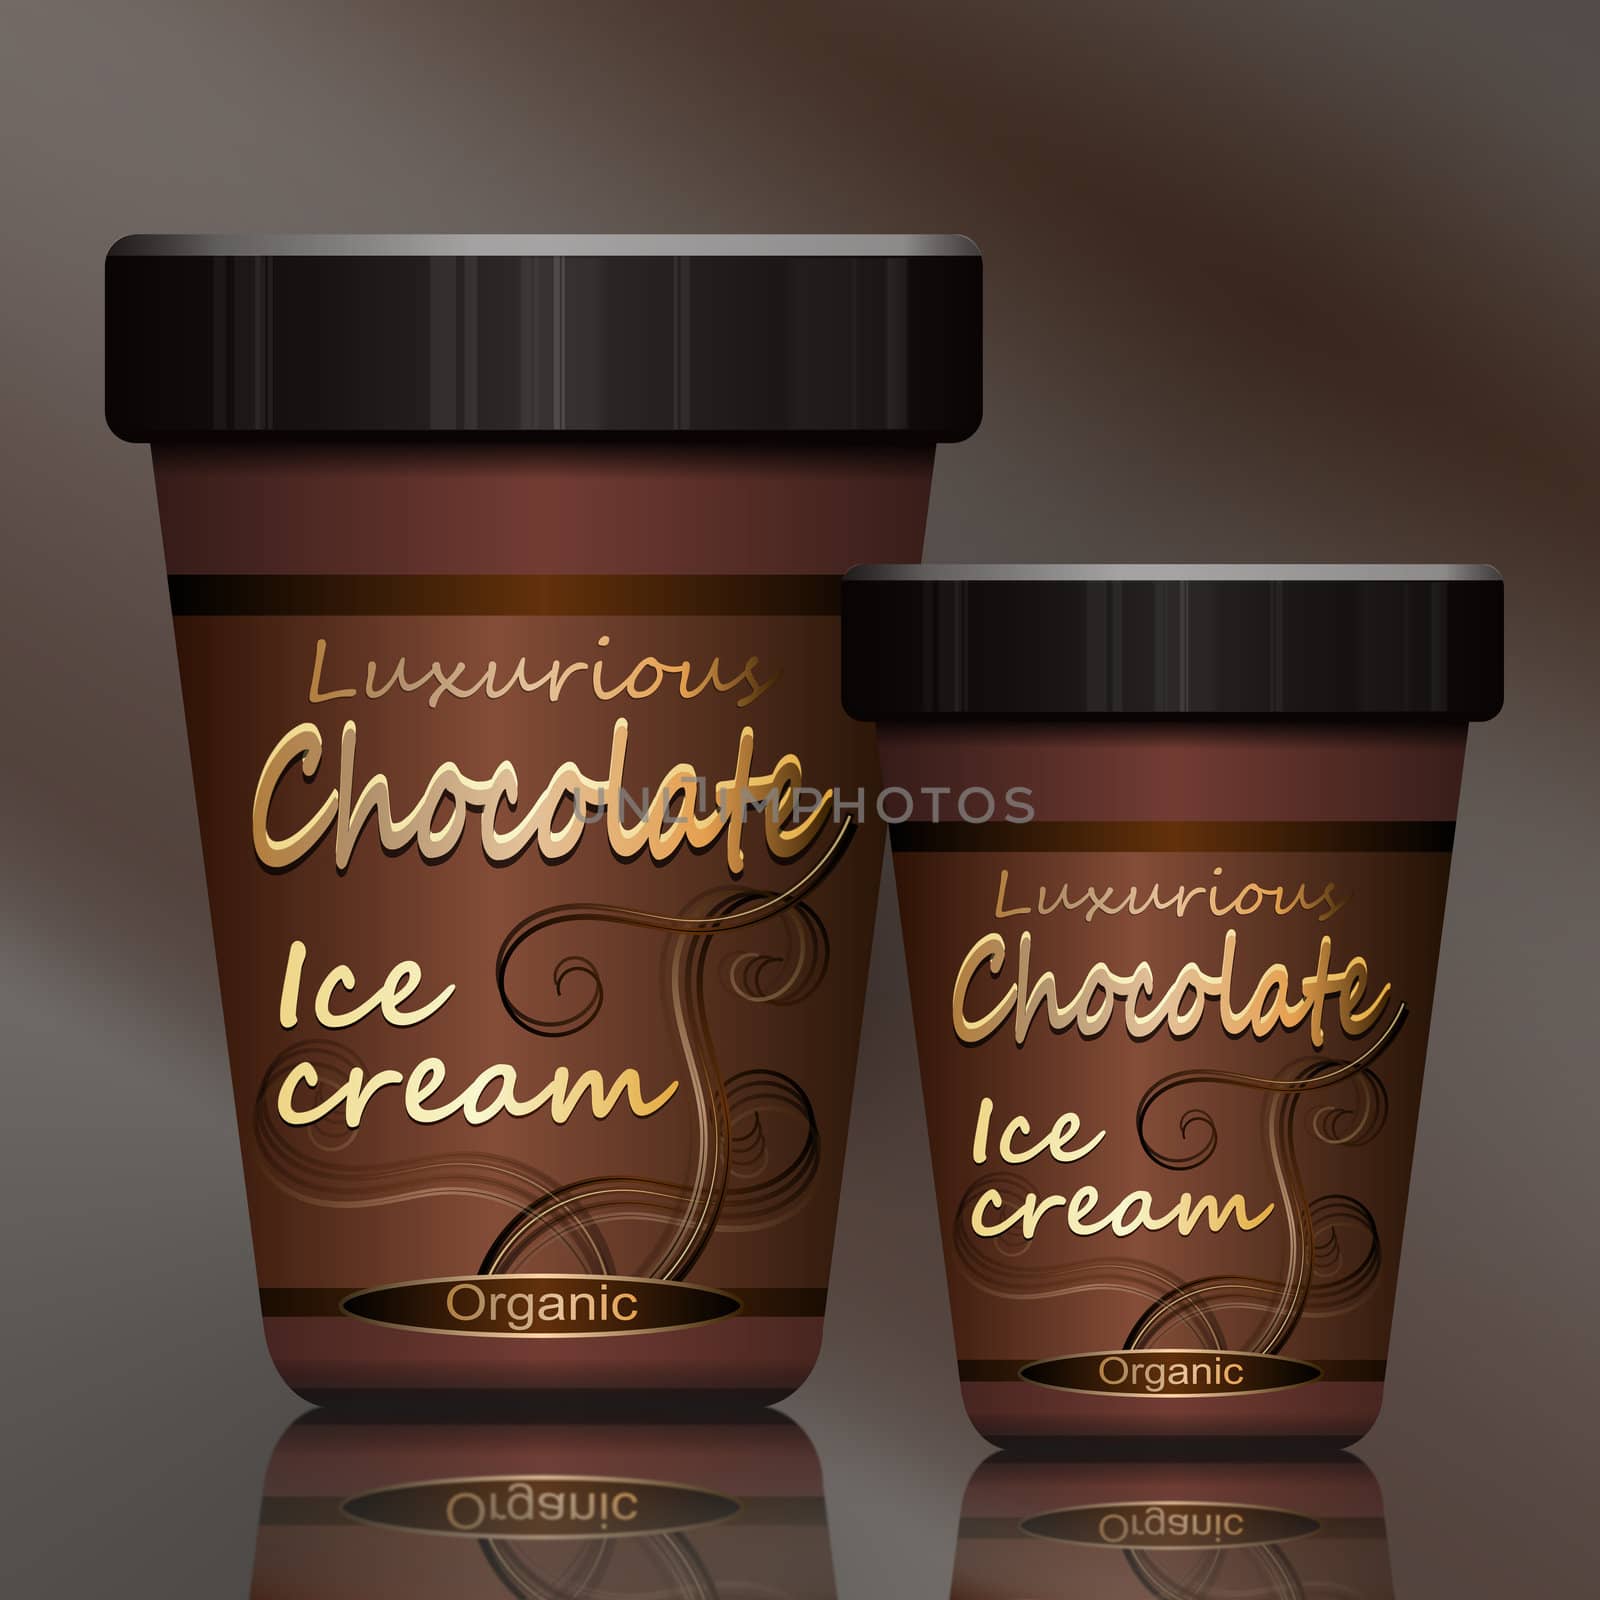 Illustration depicting two chocolate ice cream containers arranged over brown.